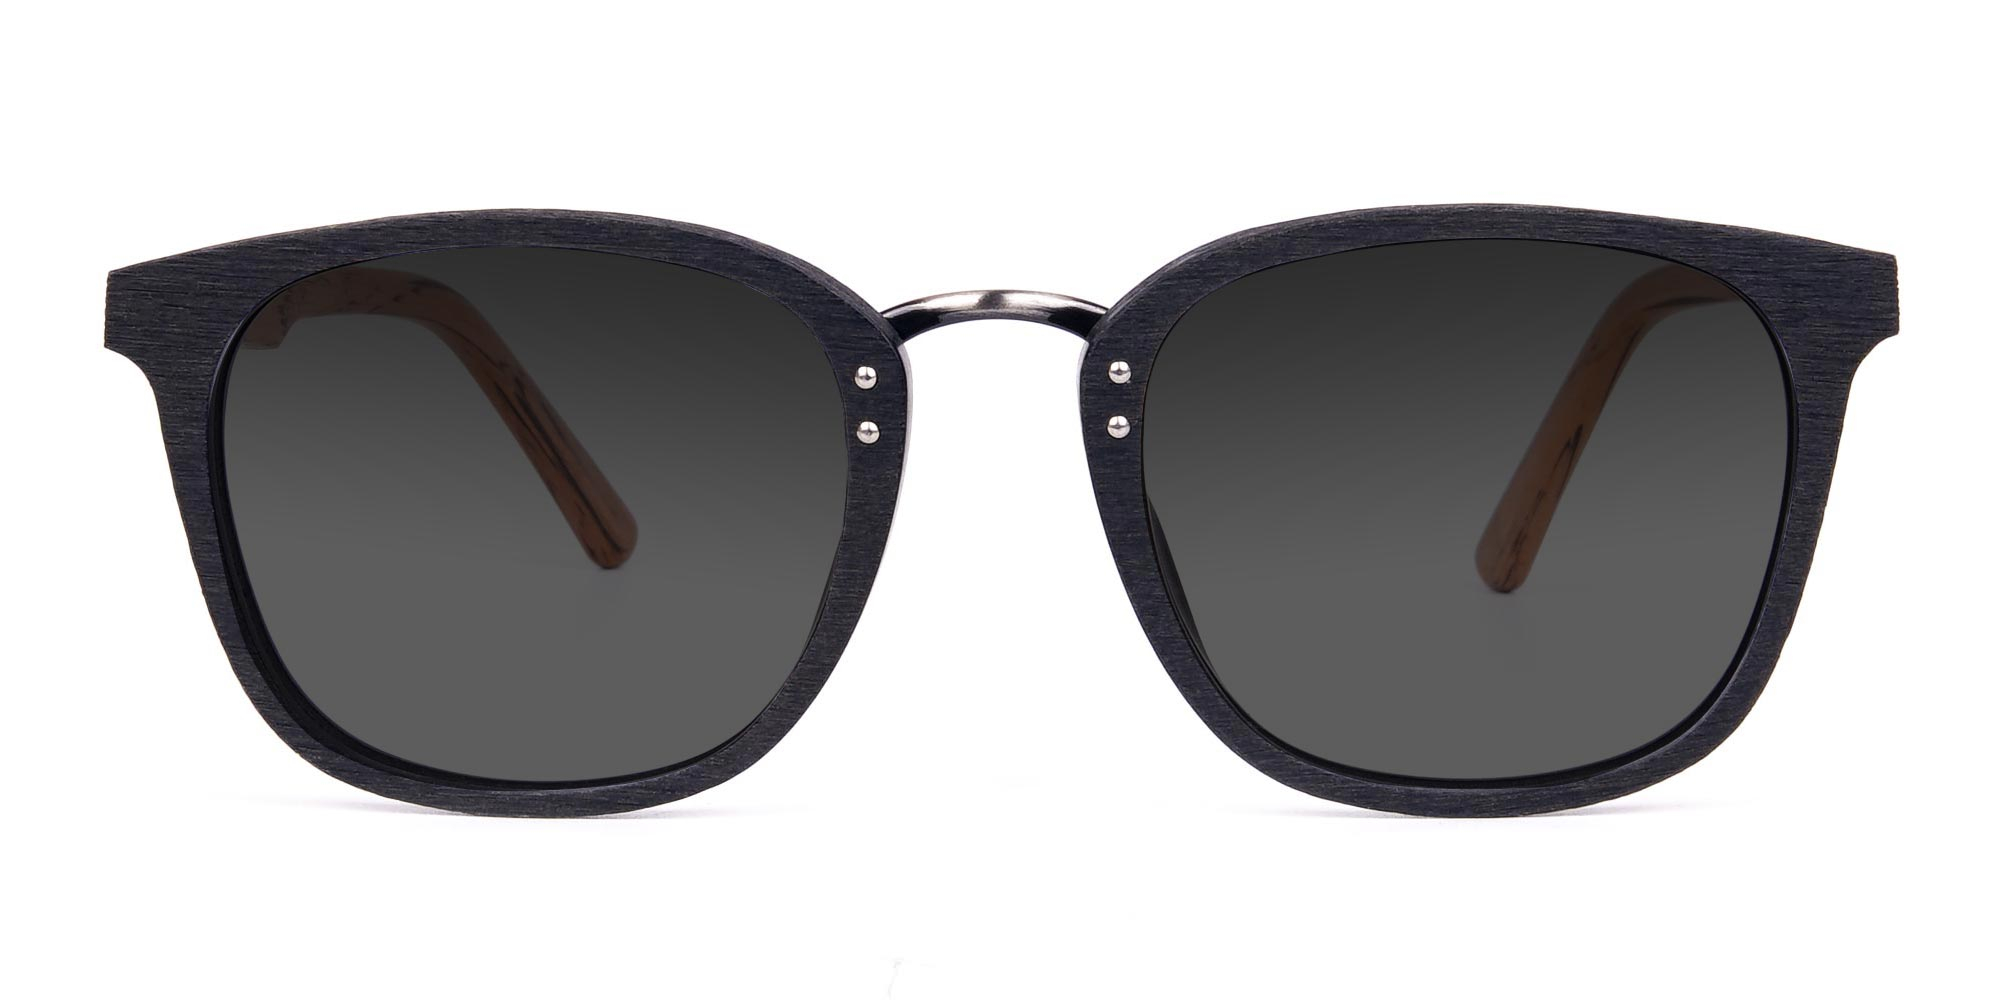 Wood-Black-Frame-Square-Sunglasses-with-Grey-Tint-1